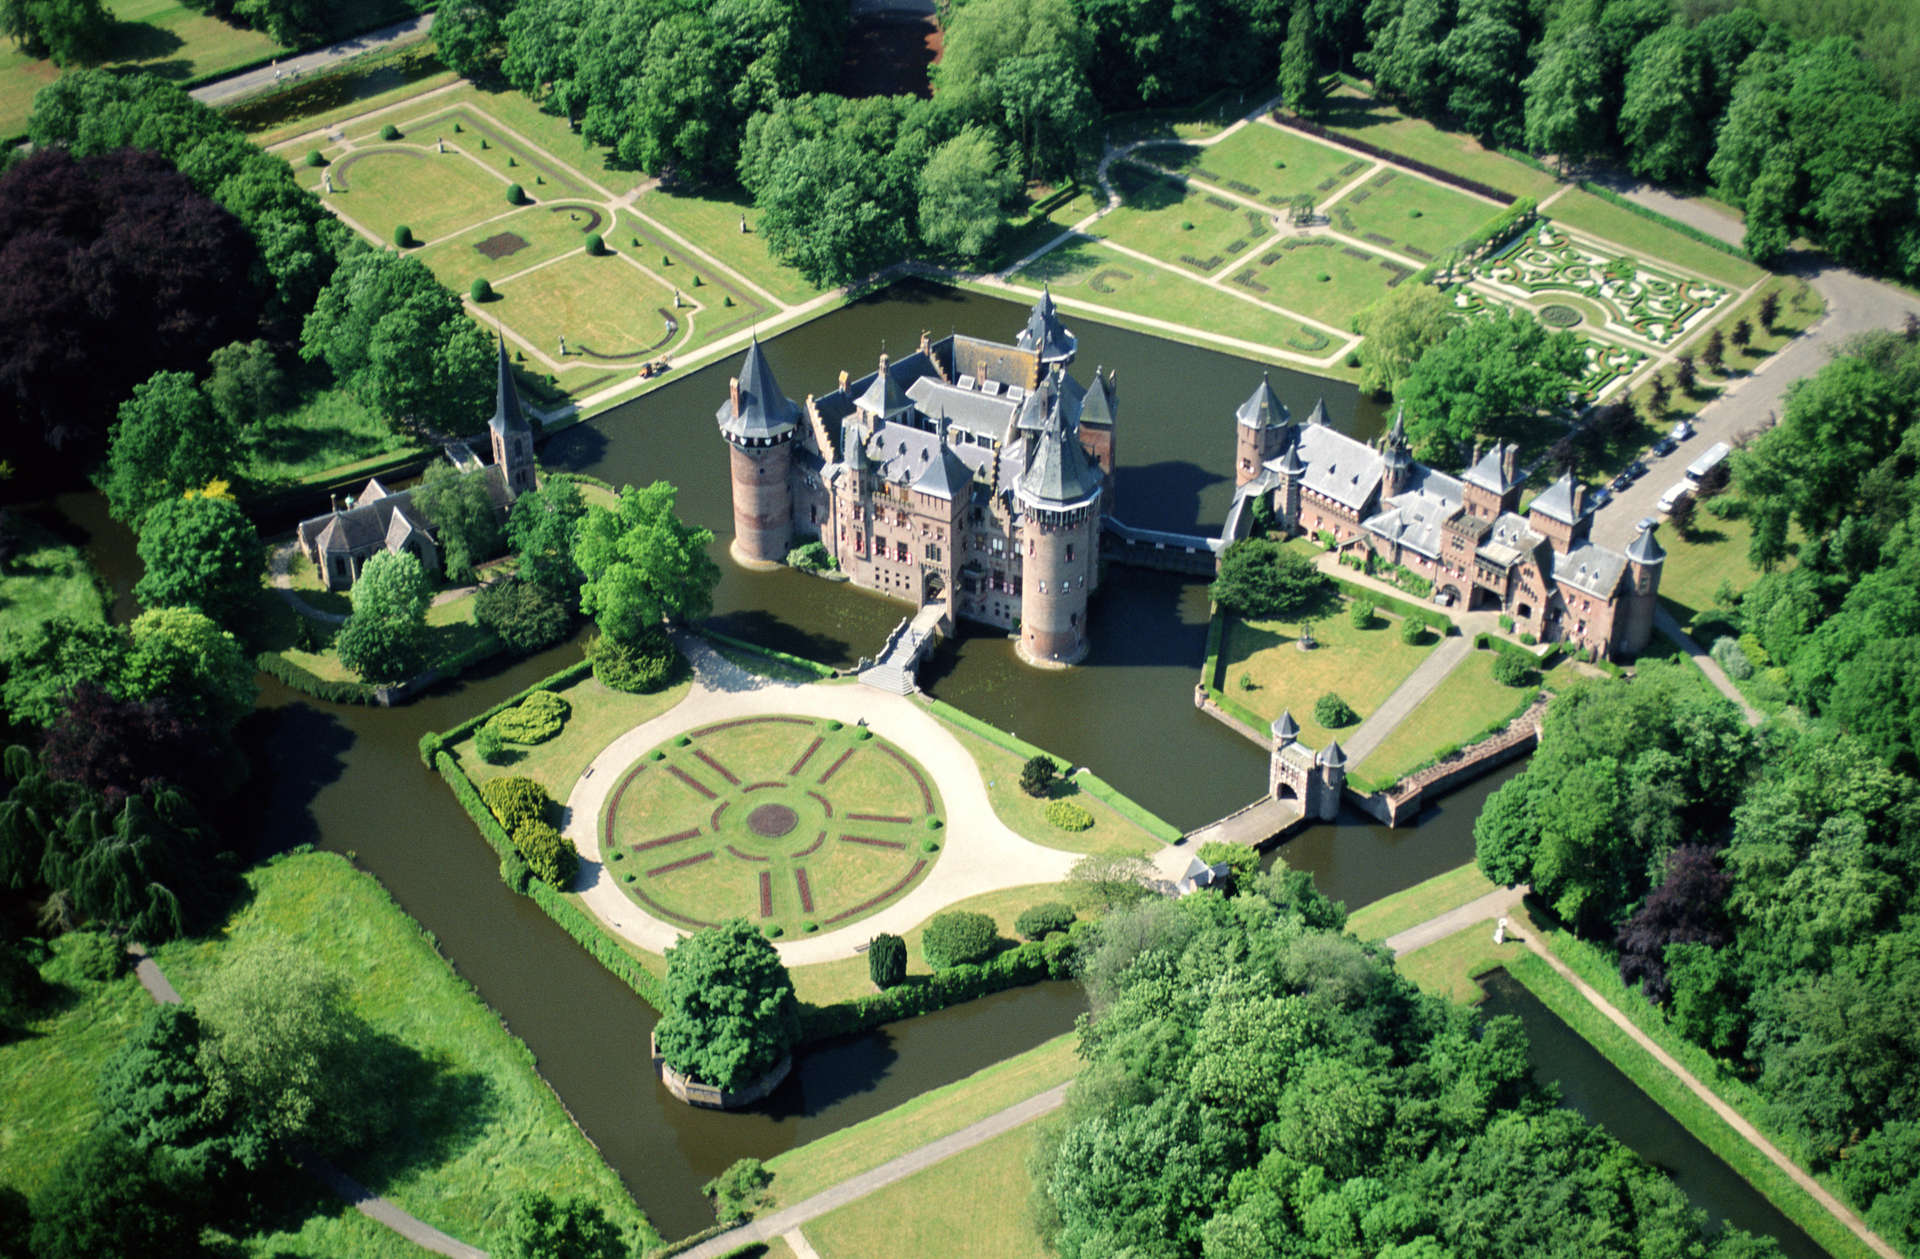 The Netherlands is home to some three hundred castles that date from medieval times to the twentieth century